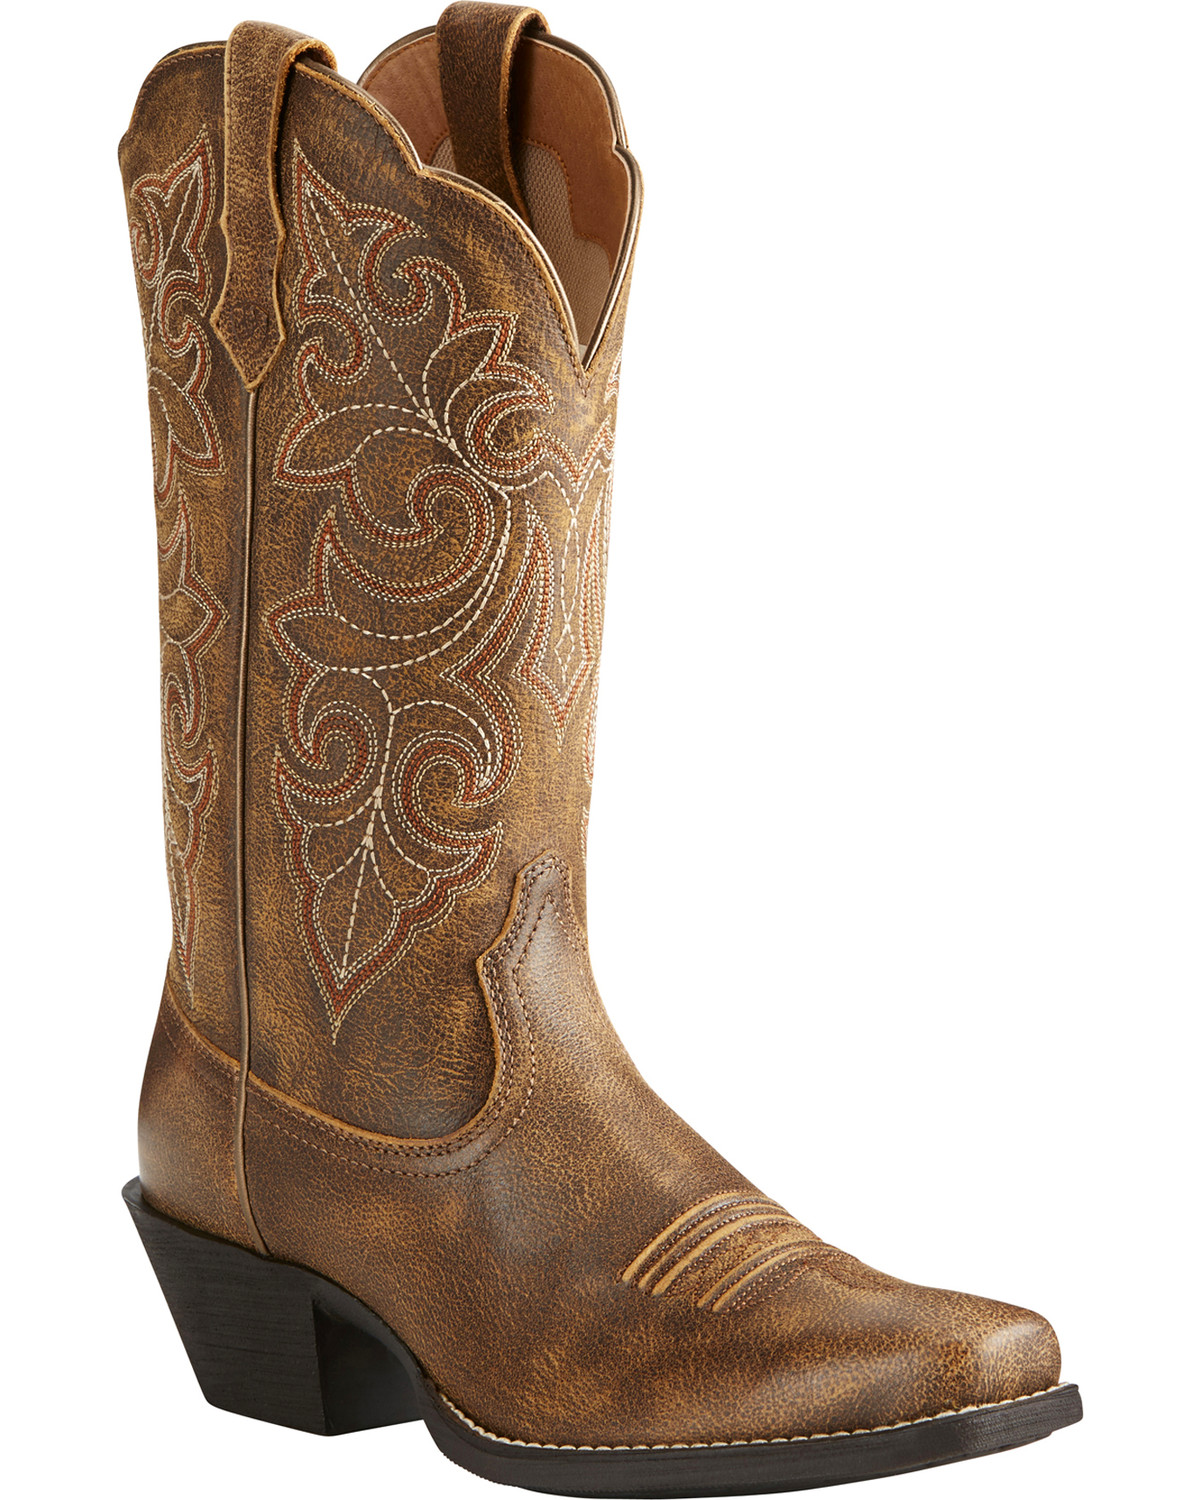 Ariat Women's Round Up Square Toe Western Boots